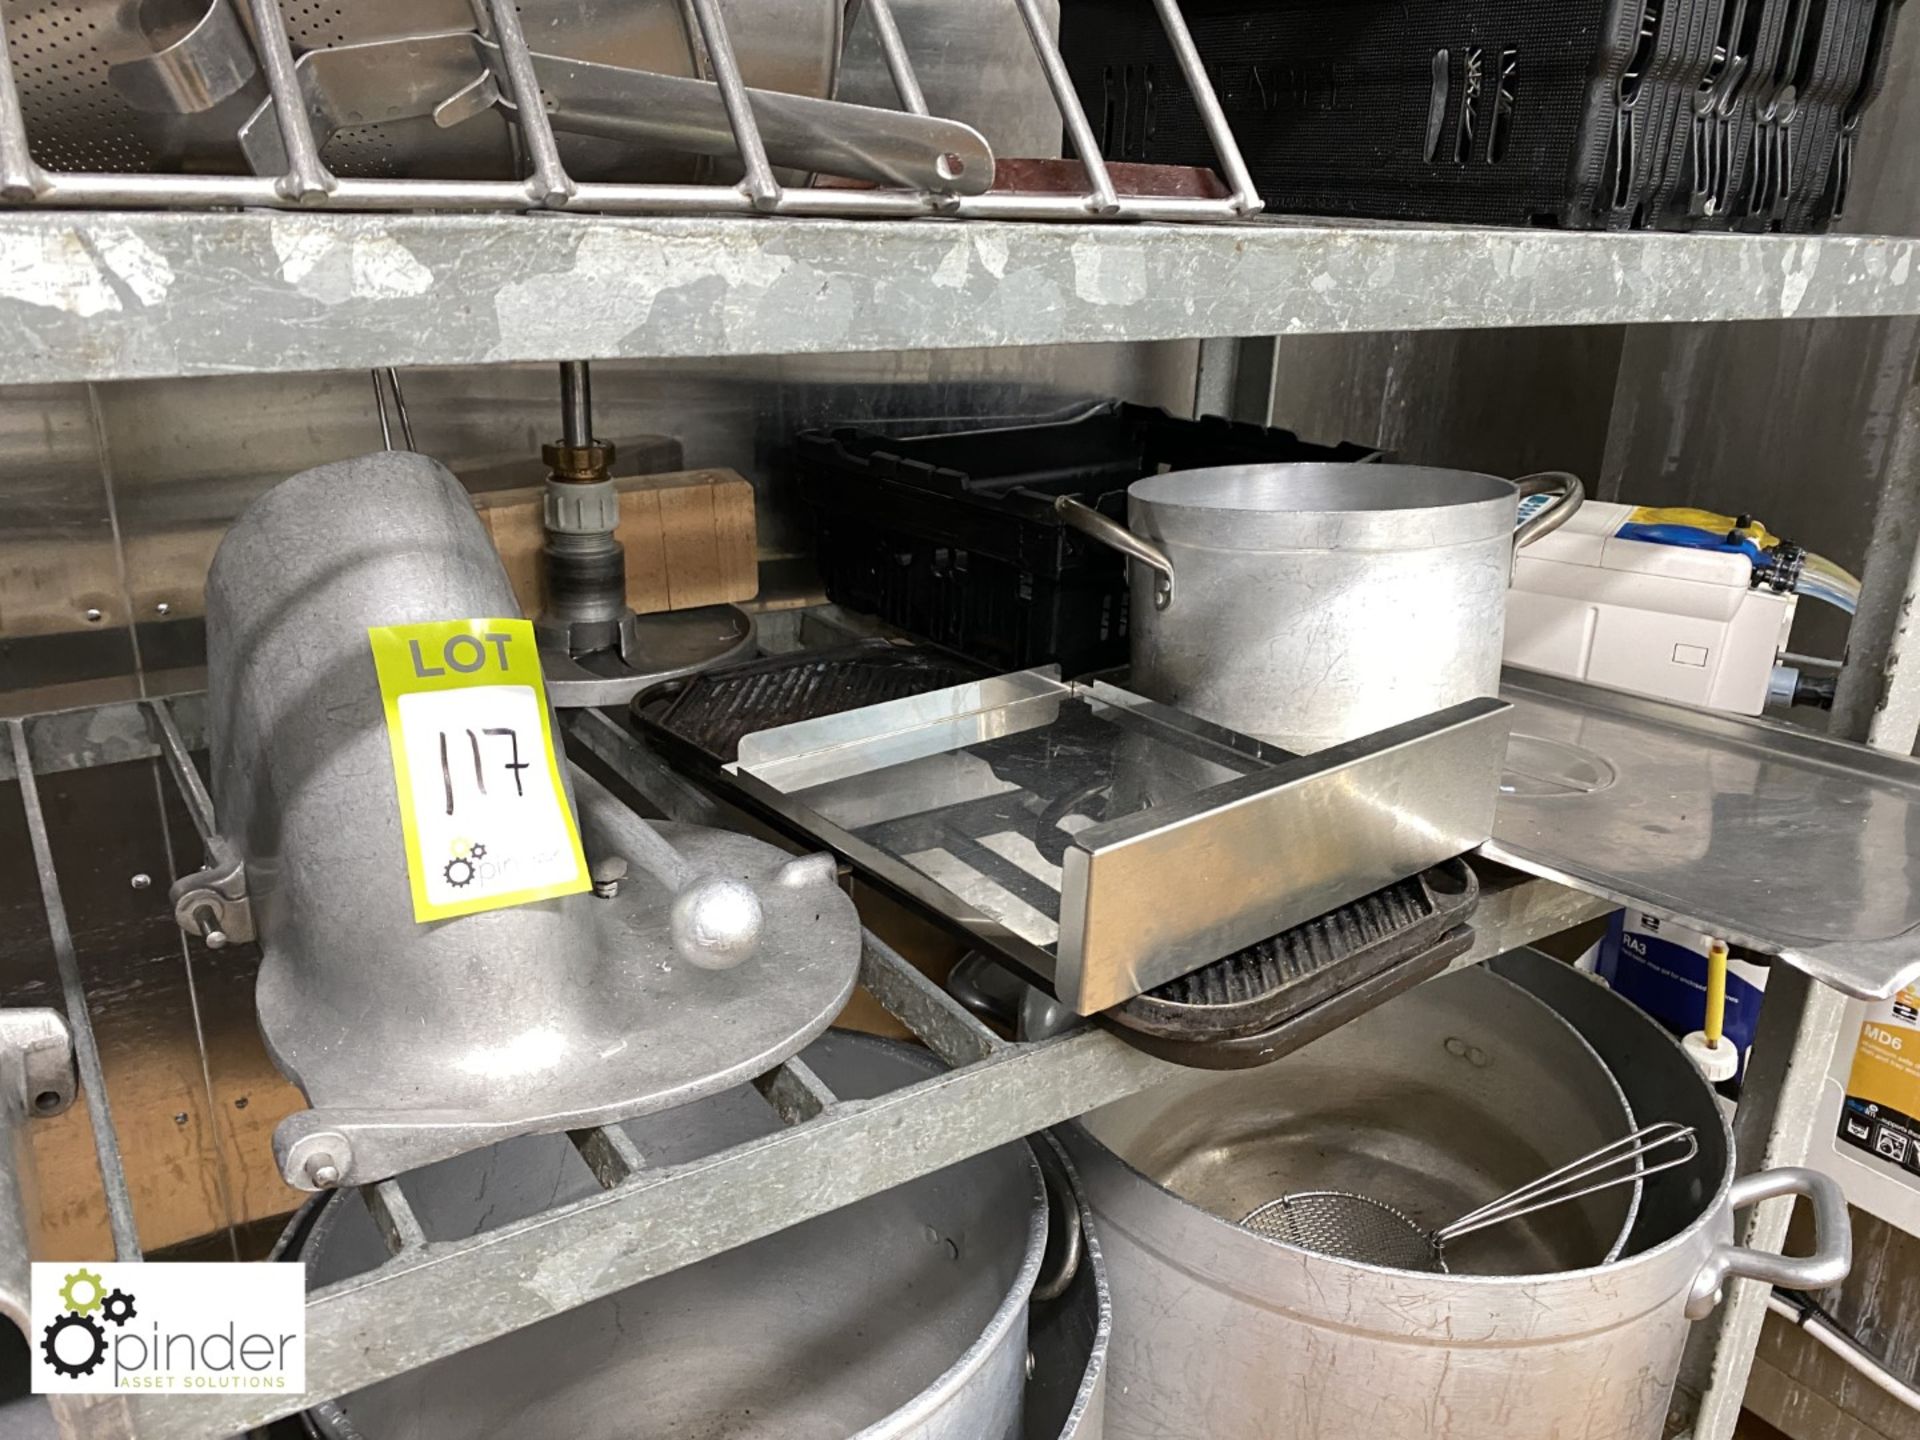 Large quantity Cooking Pots, Sieves, Trays, Pans, etc, to rack (located in Pot Wash Room, - Image 8 of 11